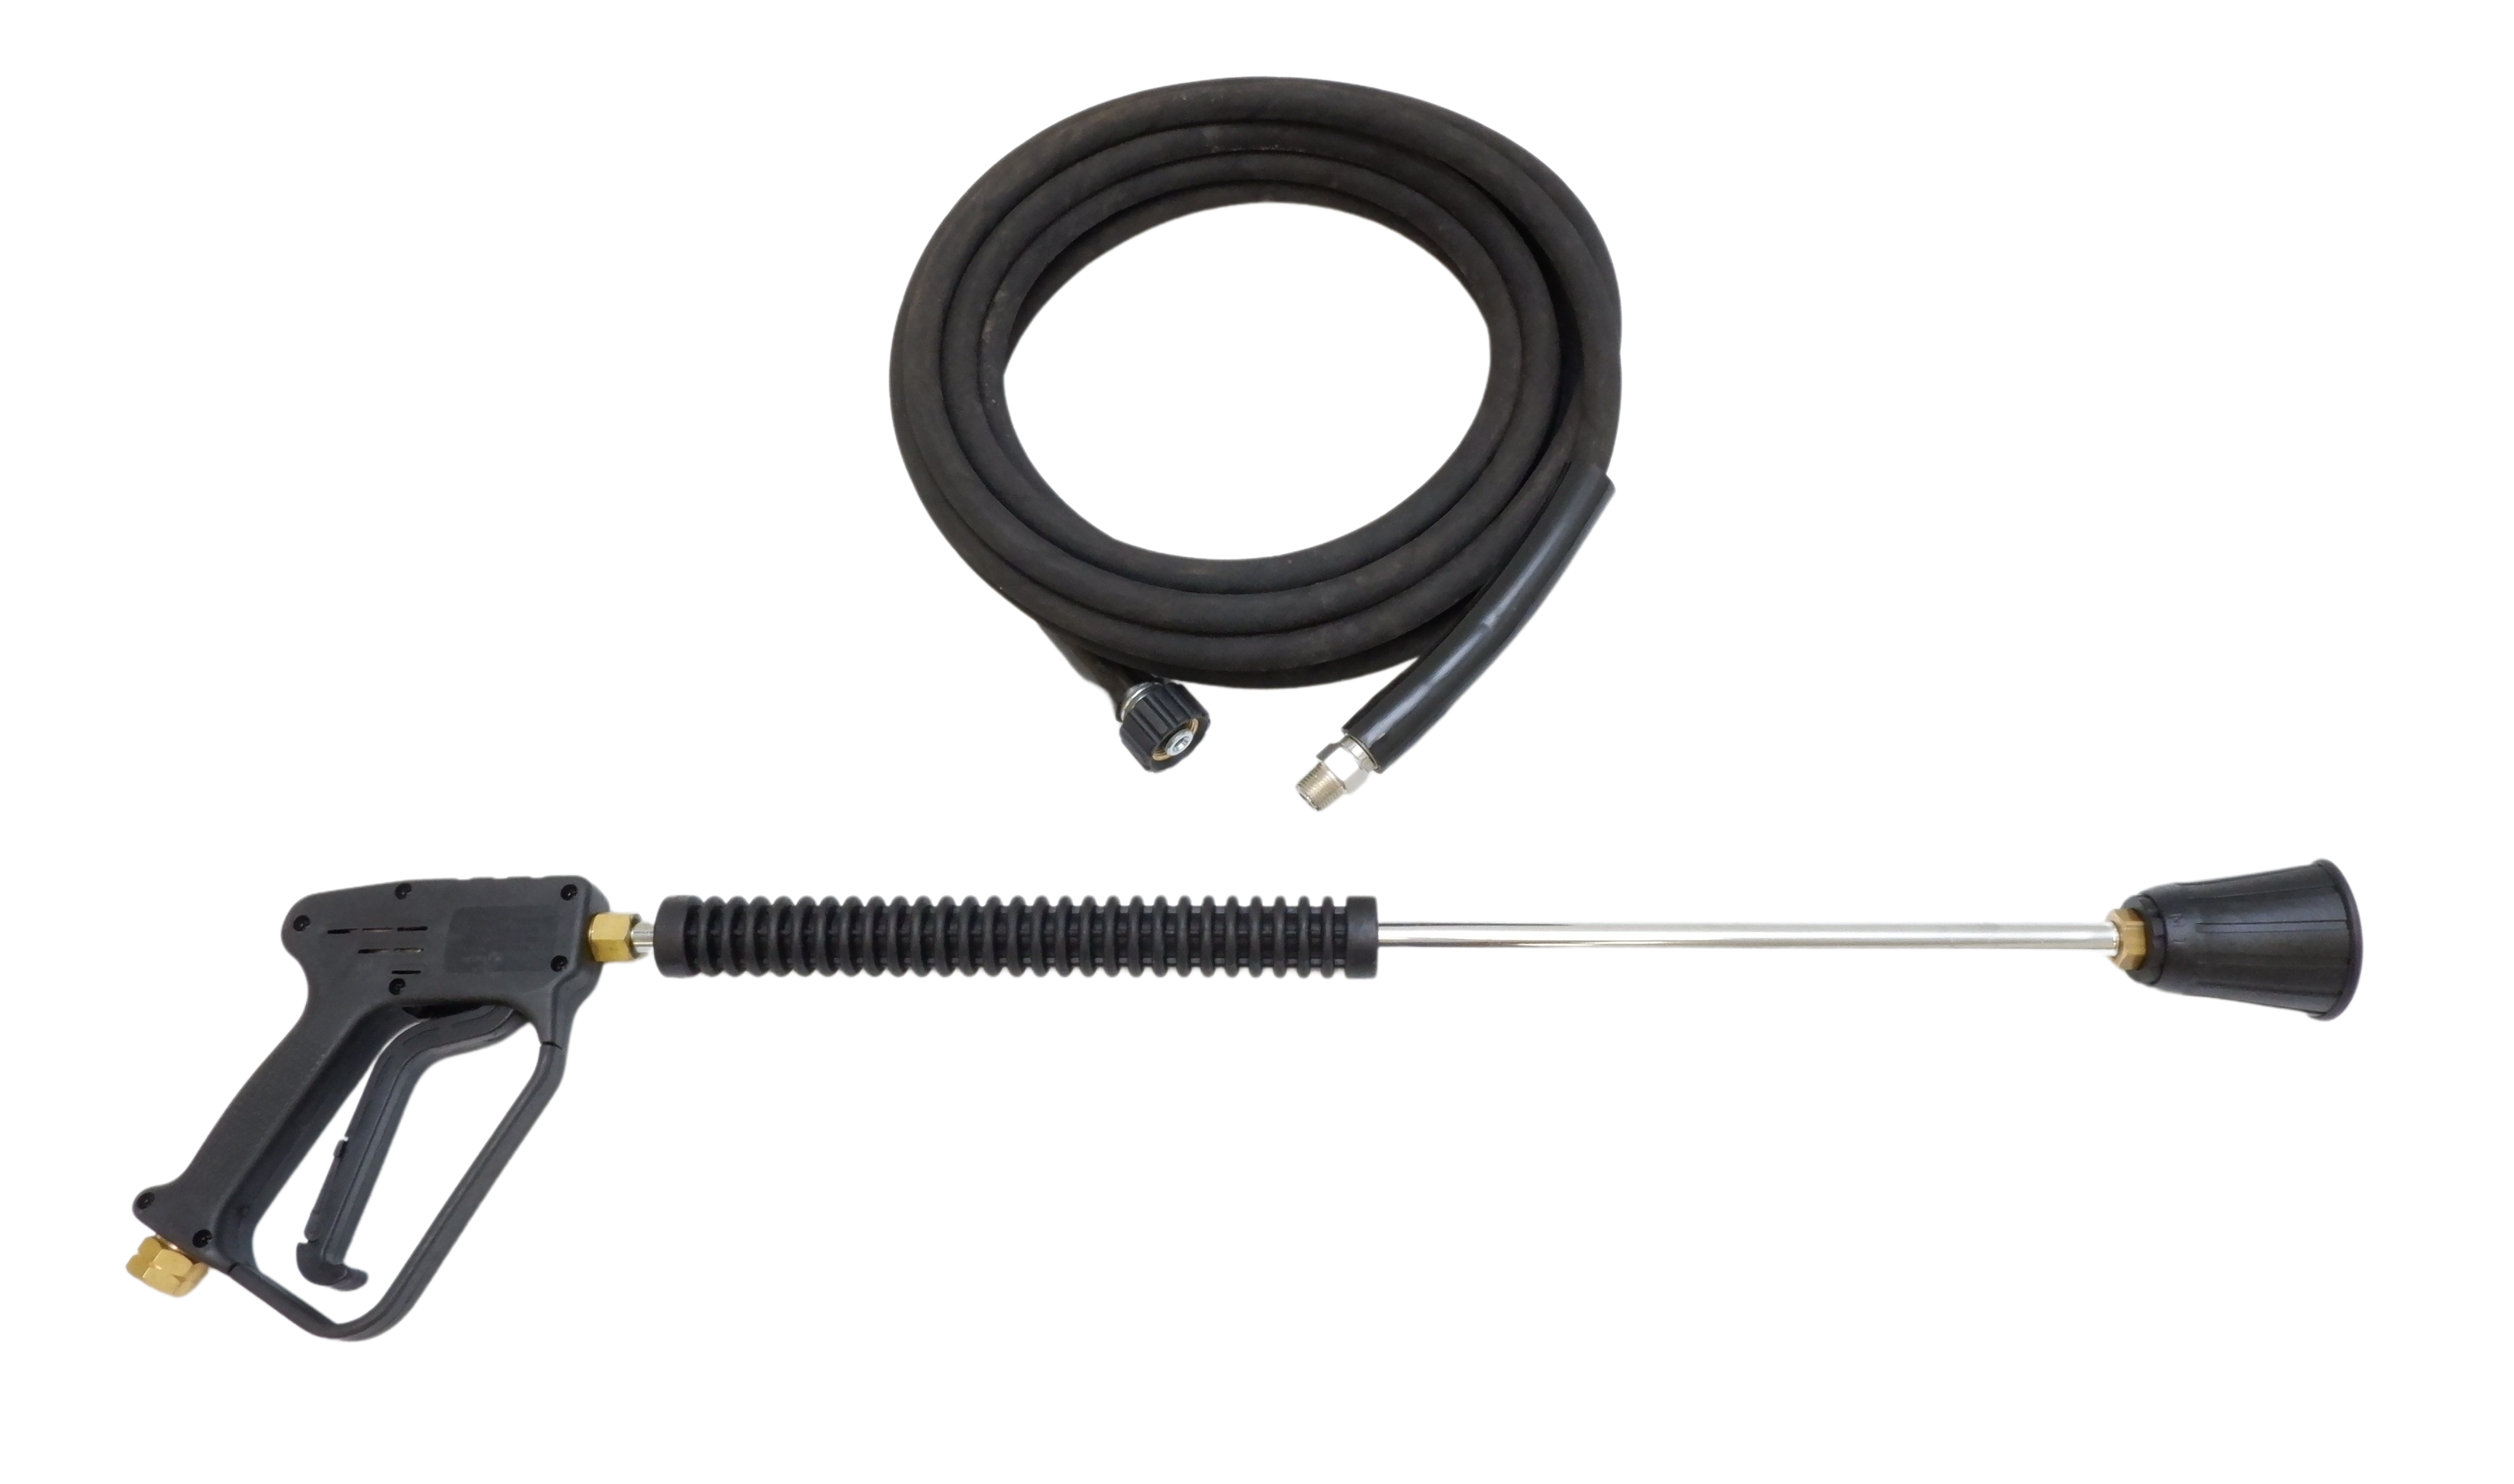 General Pipe Cleaners SWA-1500 Spray Wand Kit for JM-1450 Jetter